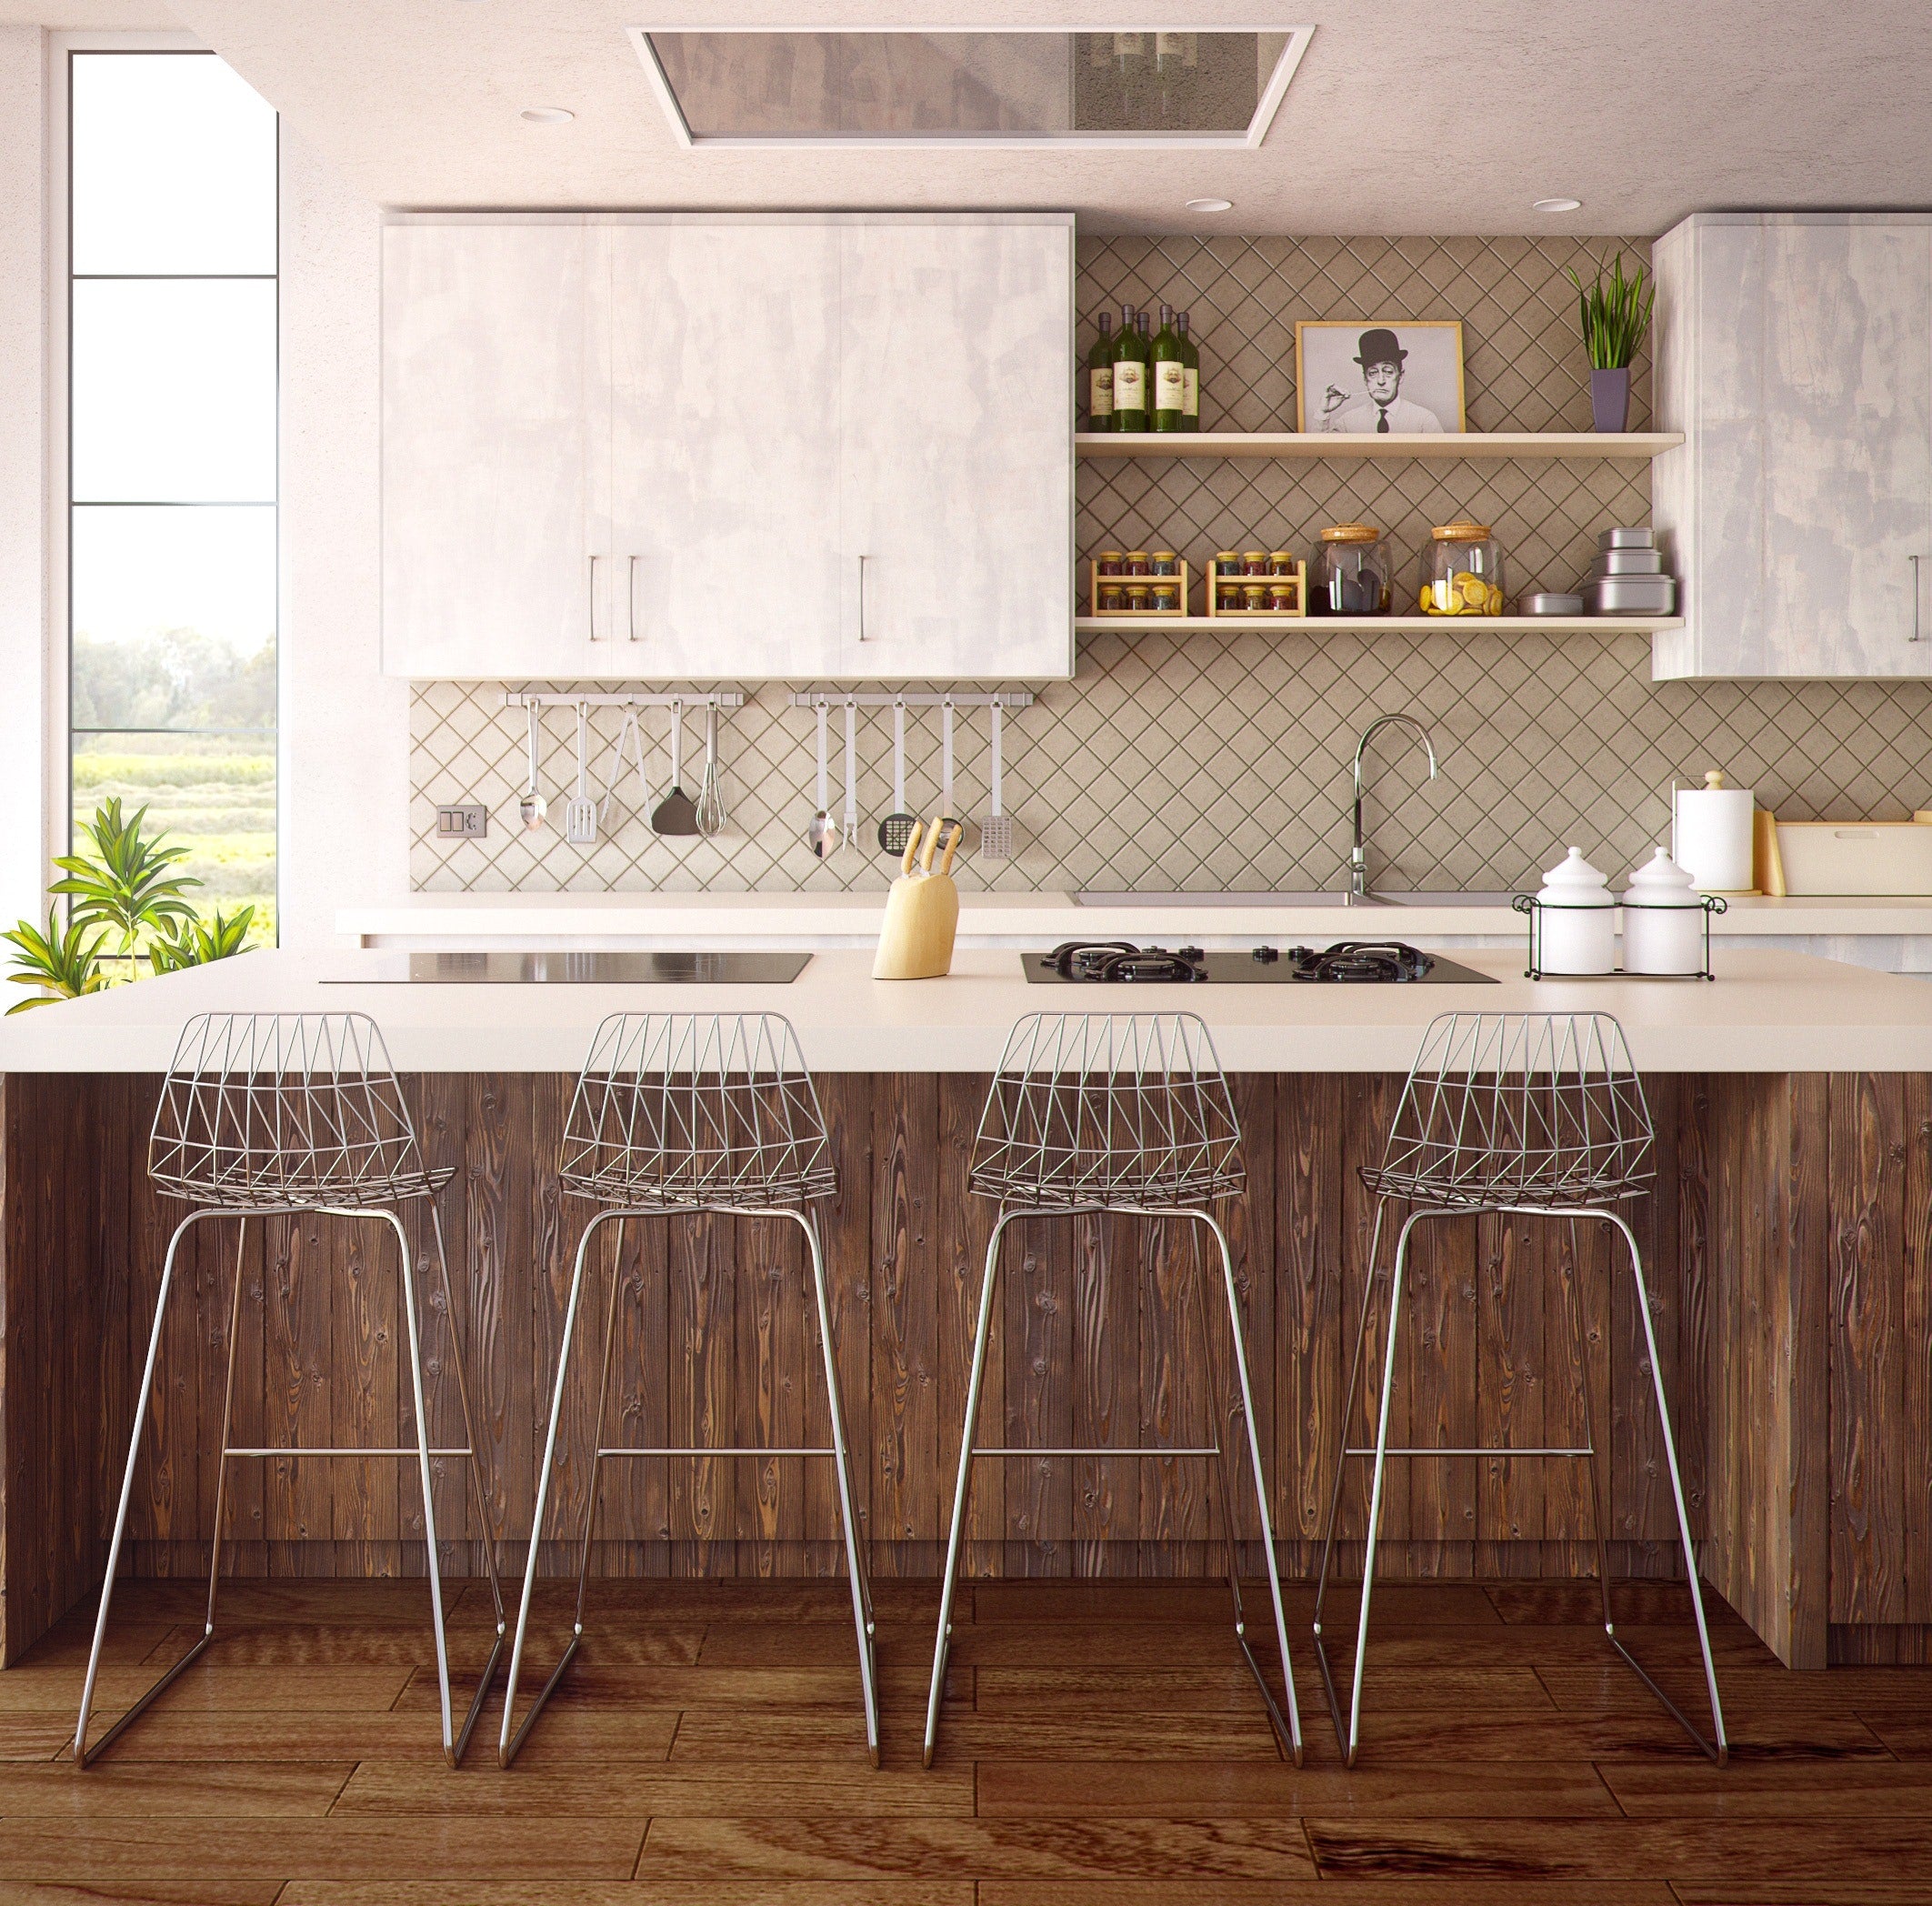 7 Unbelievably Cool Ways to Style Your Kitchen